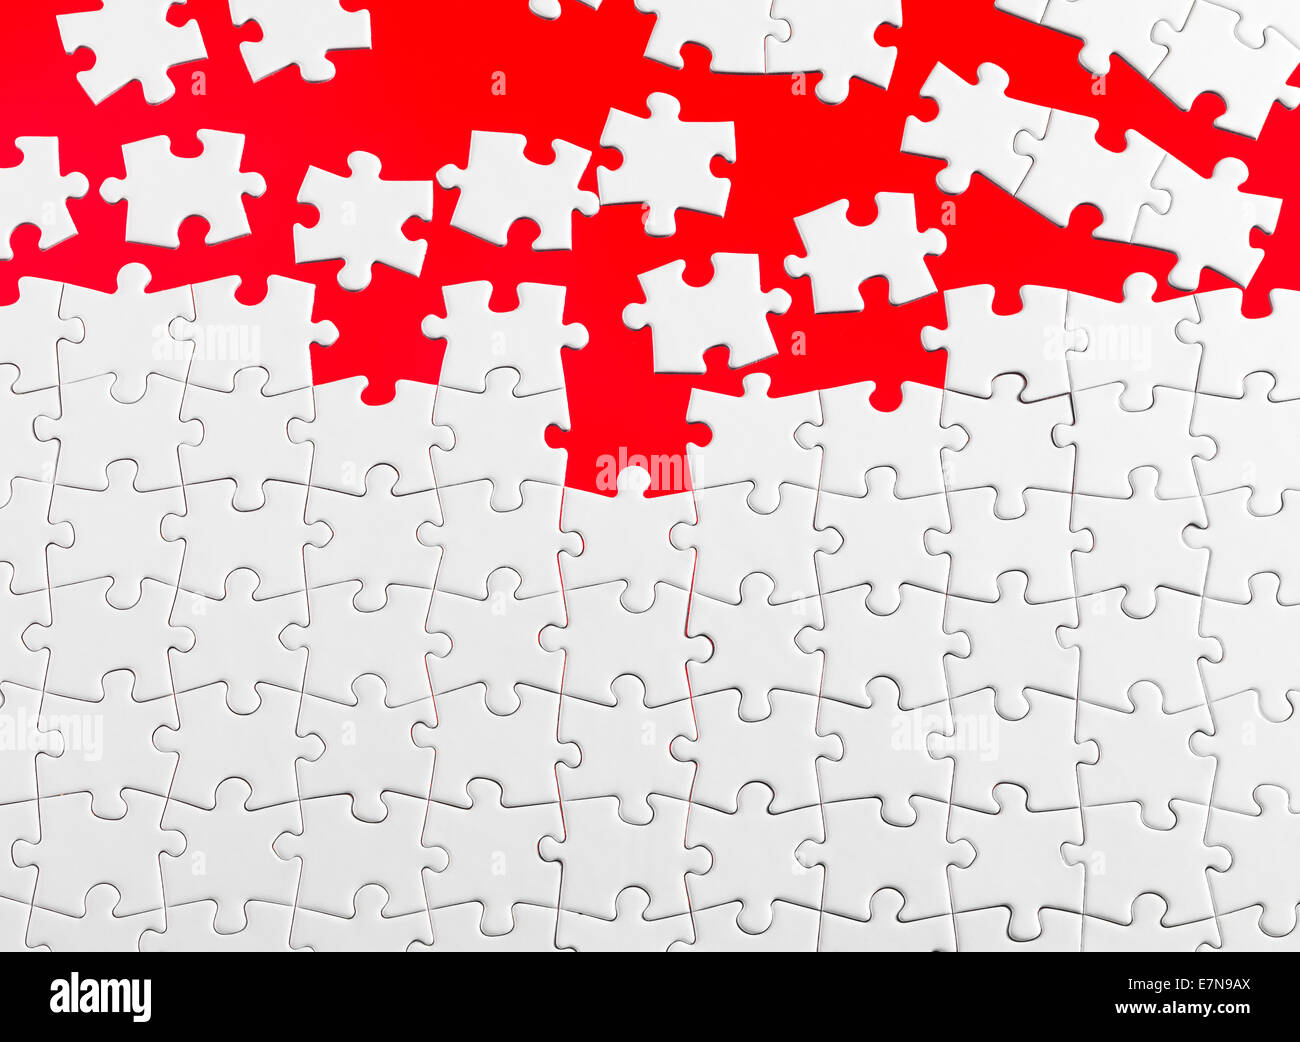 Jigsaw pieces with a red background Stock Photo